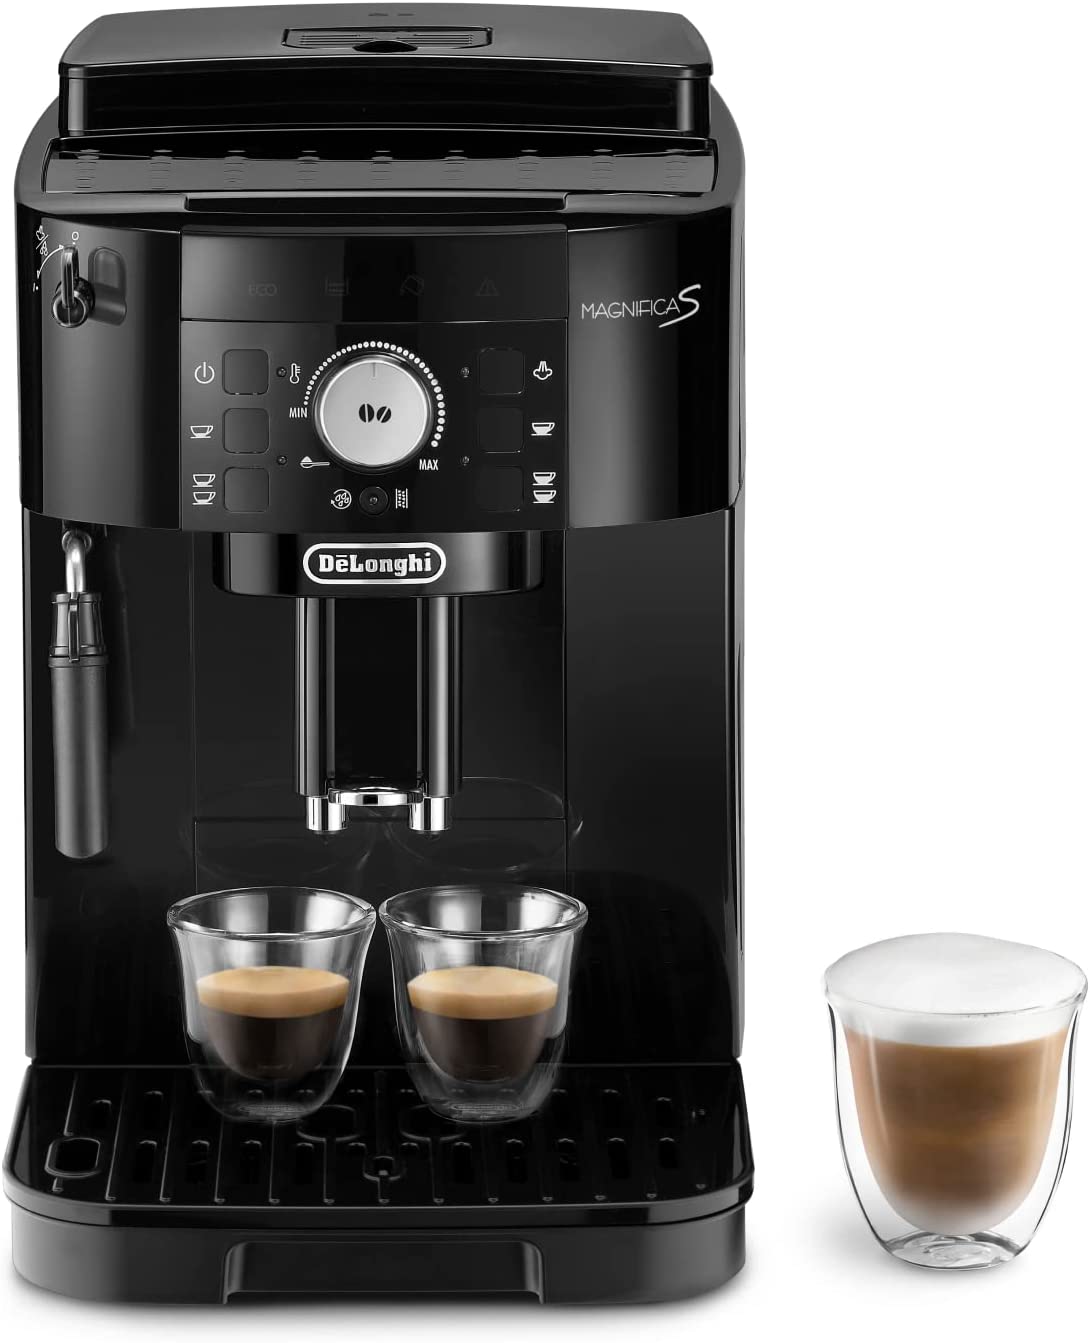 De\'Longhi Magnifica S ECAM11.112.B Fully Automatic Coffee Machine with Milk Frothing Nozzle for Cappuccino, with Espresso Direct Selection Buttons and Rotary Control, 2-Cup Function, Black